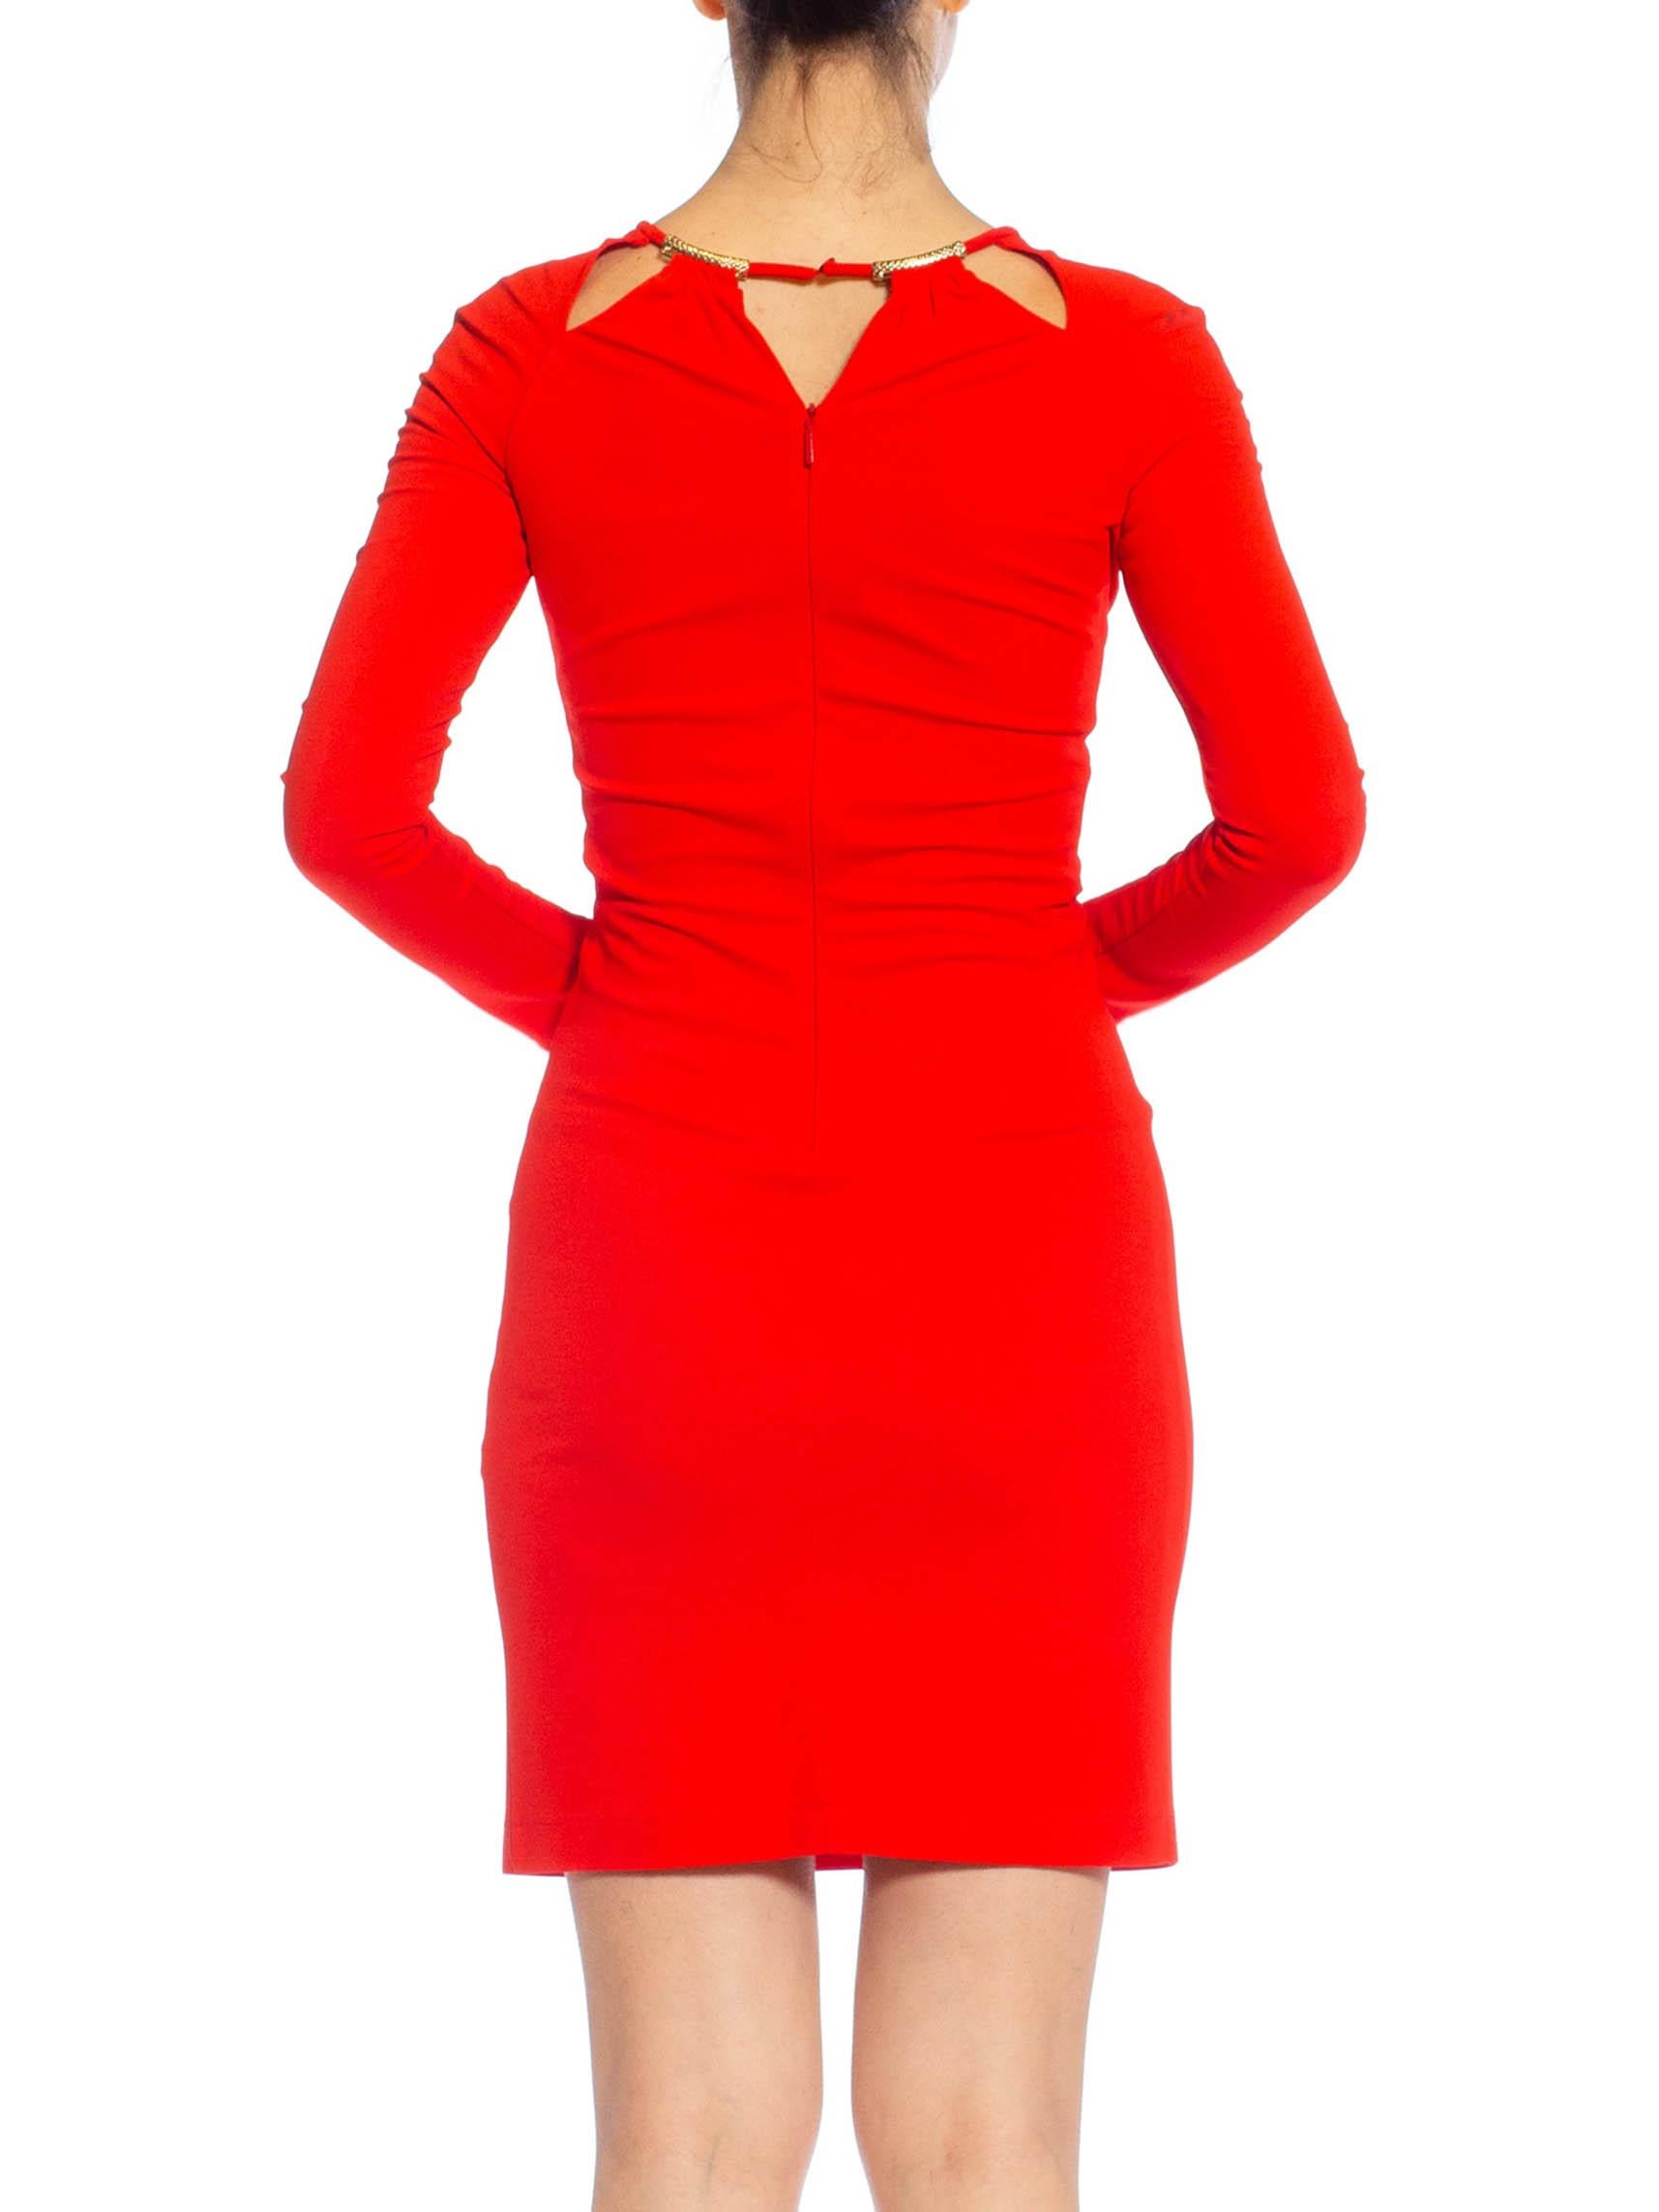 2000S ROBERTO CAVALLI Red & Gold Jersey Dress With Long Sleeves For Sale 1